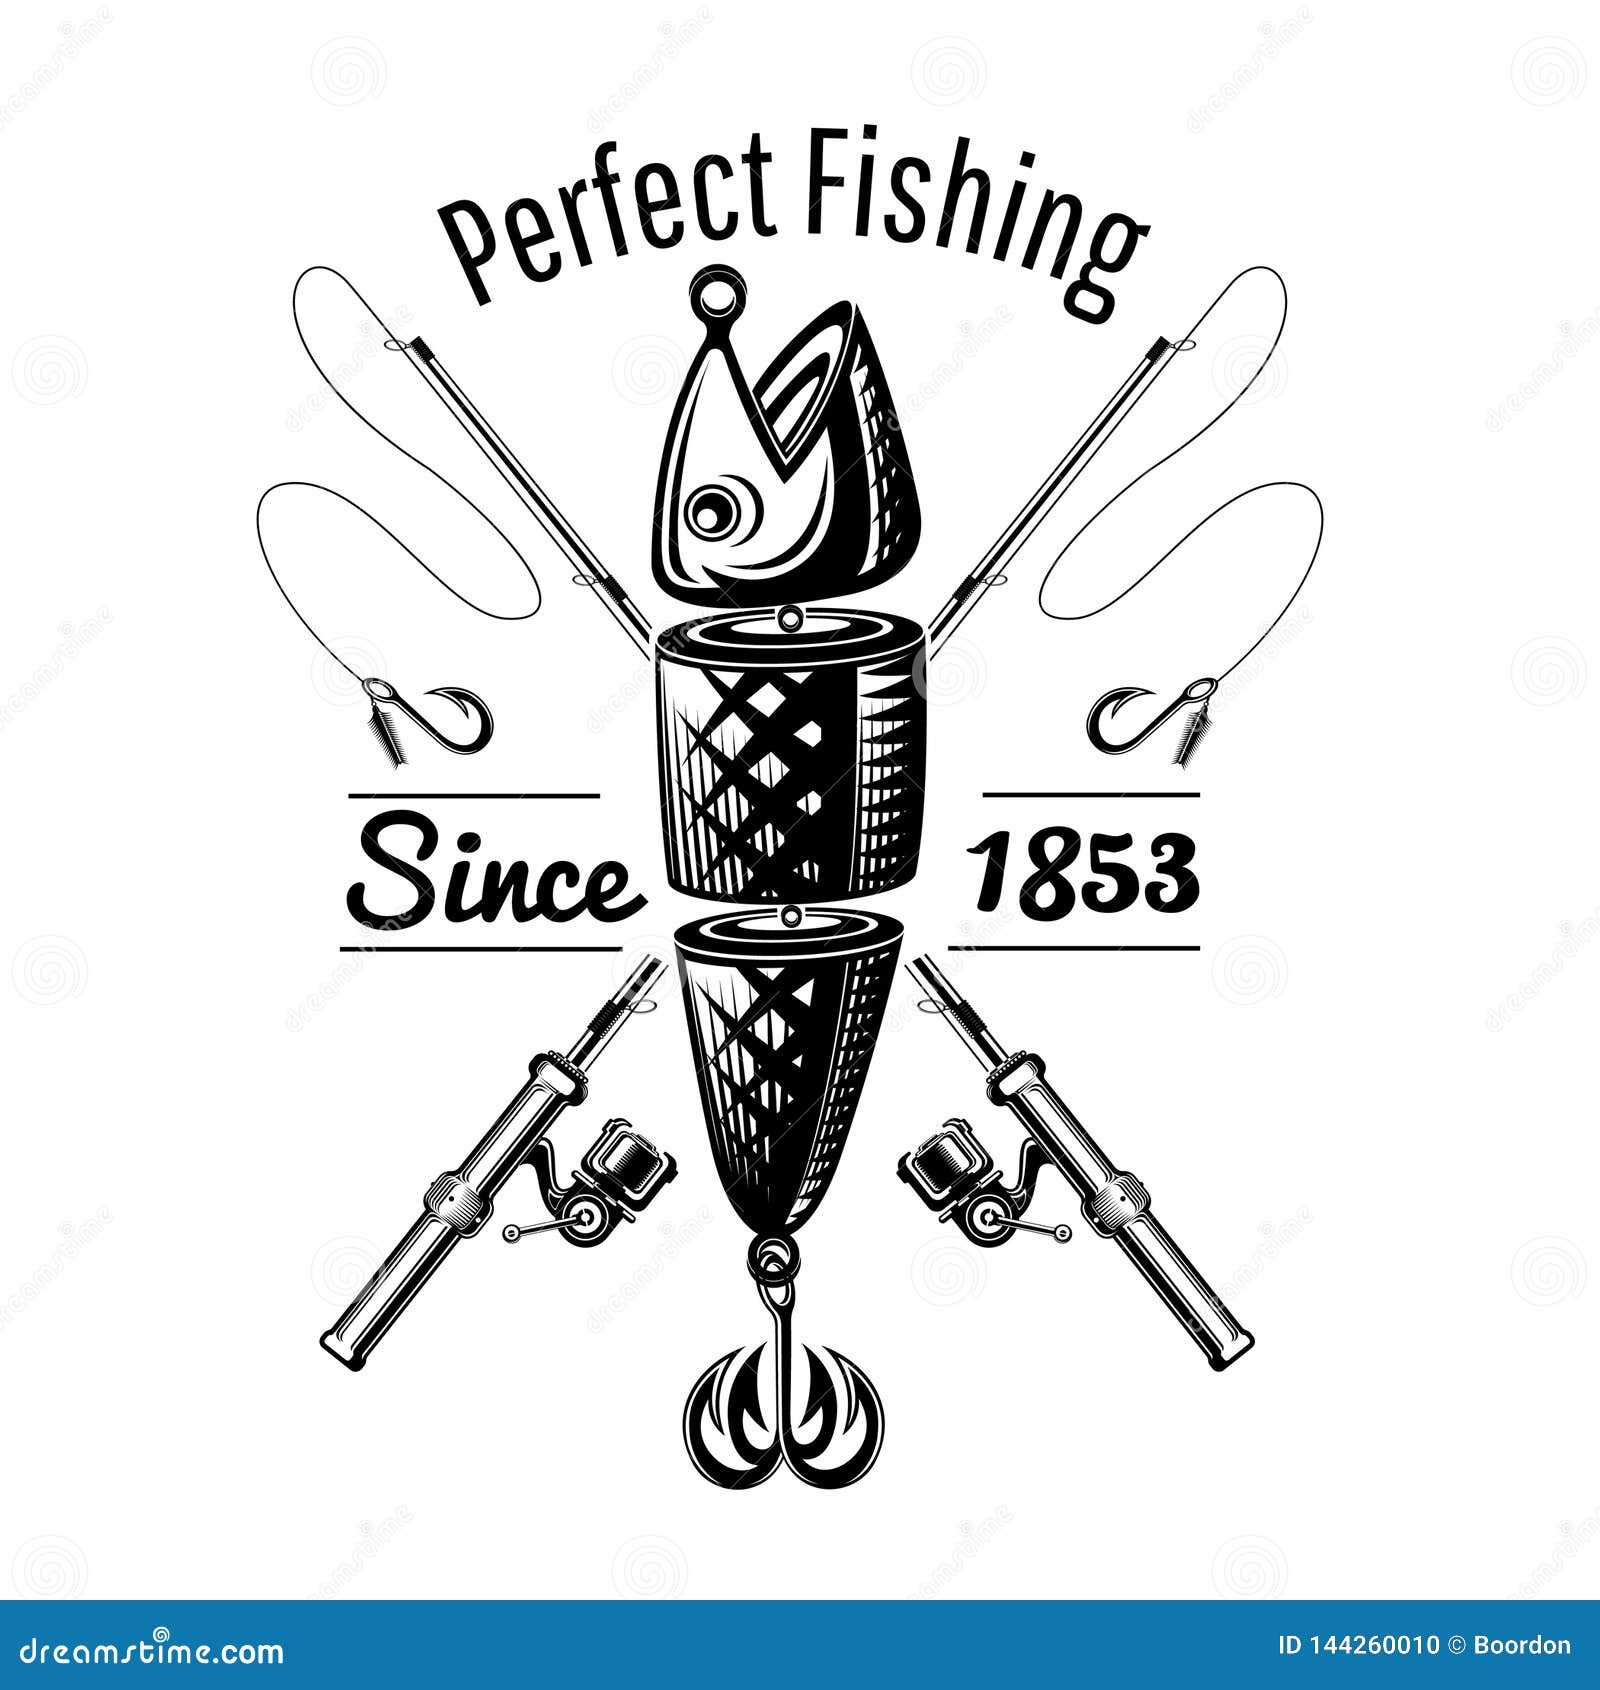 Spoon-bait Fish with Crossed Fishing Rods in Engraving Style. Logo